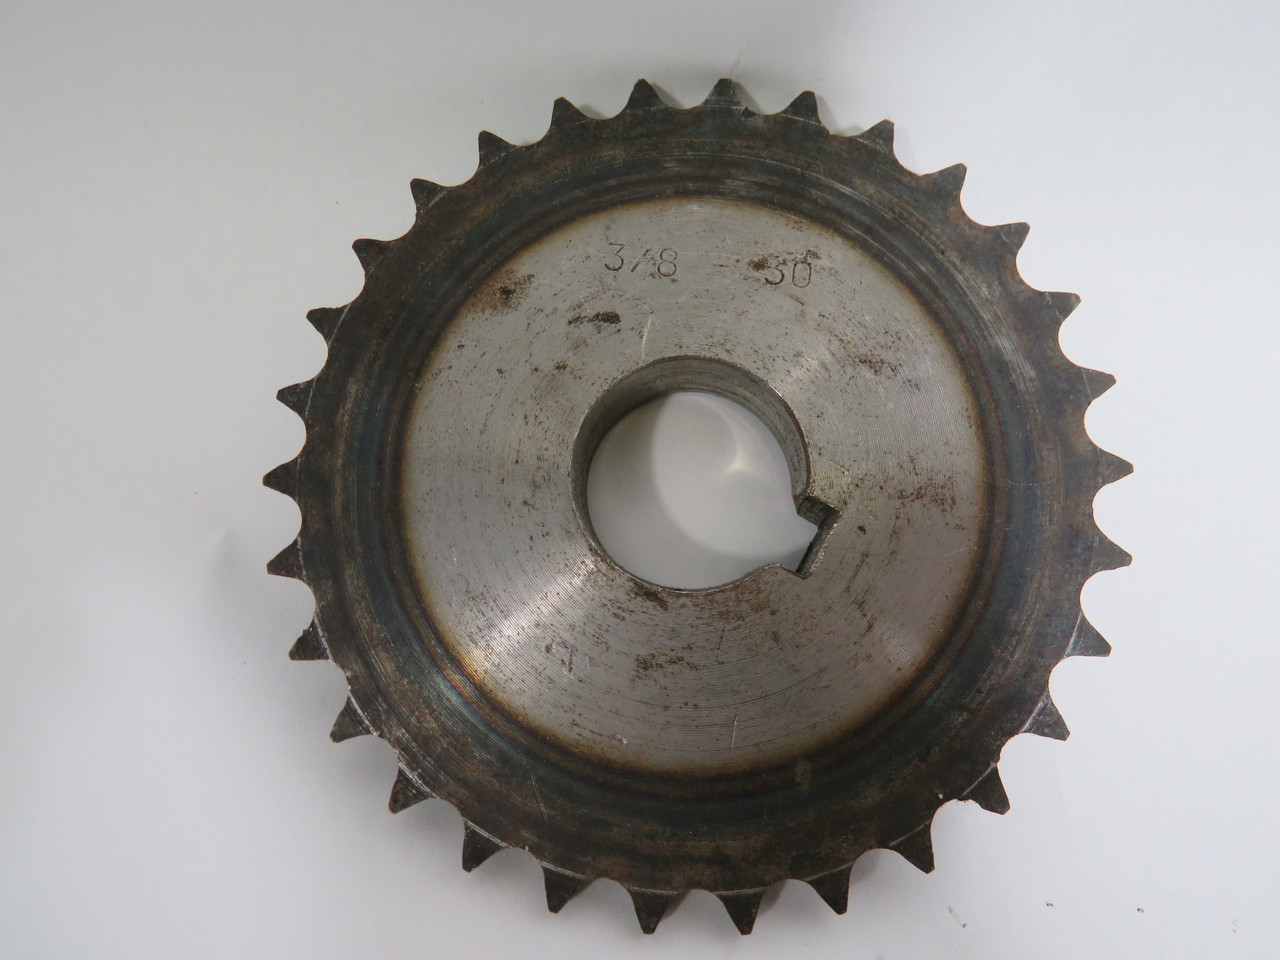 Generic 3/8-30 Roller Sprocket 1"ID 30T 35 Chain 3/8" Pitch 5/8" LTB USED